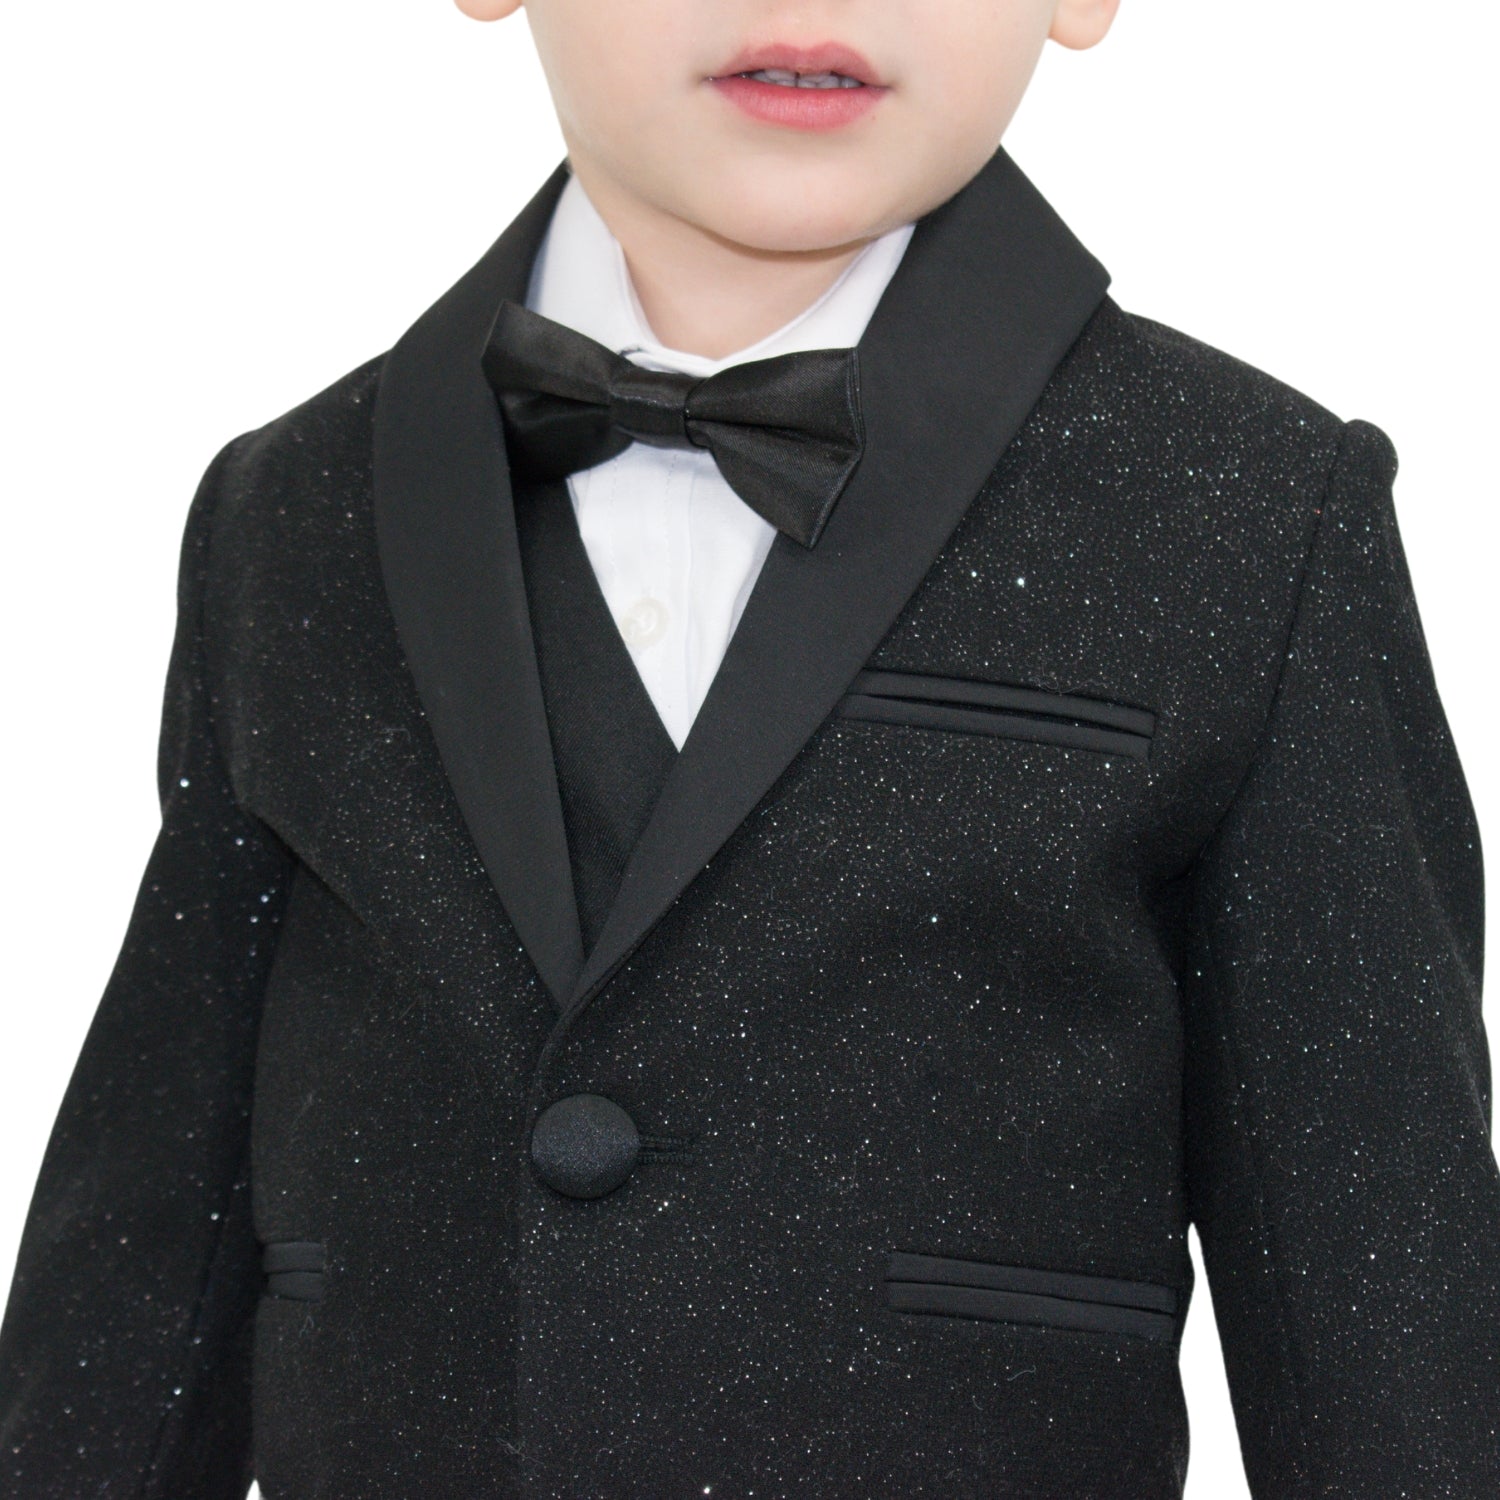 The Baby Ceremony Formal Boys Suit